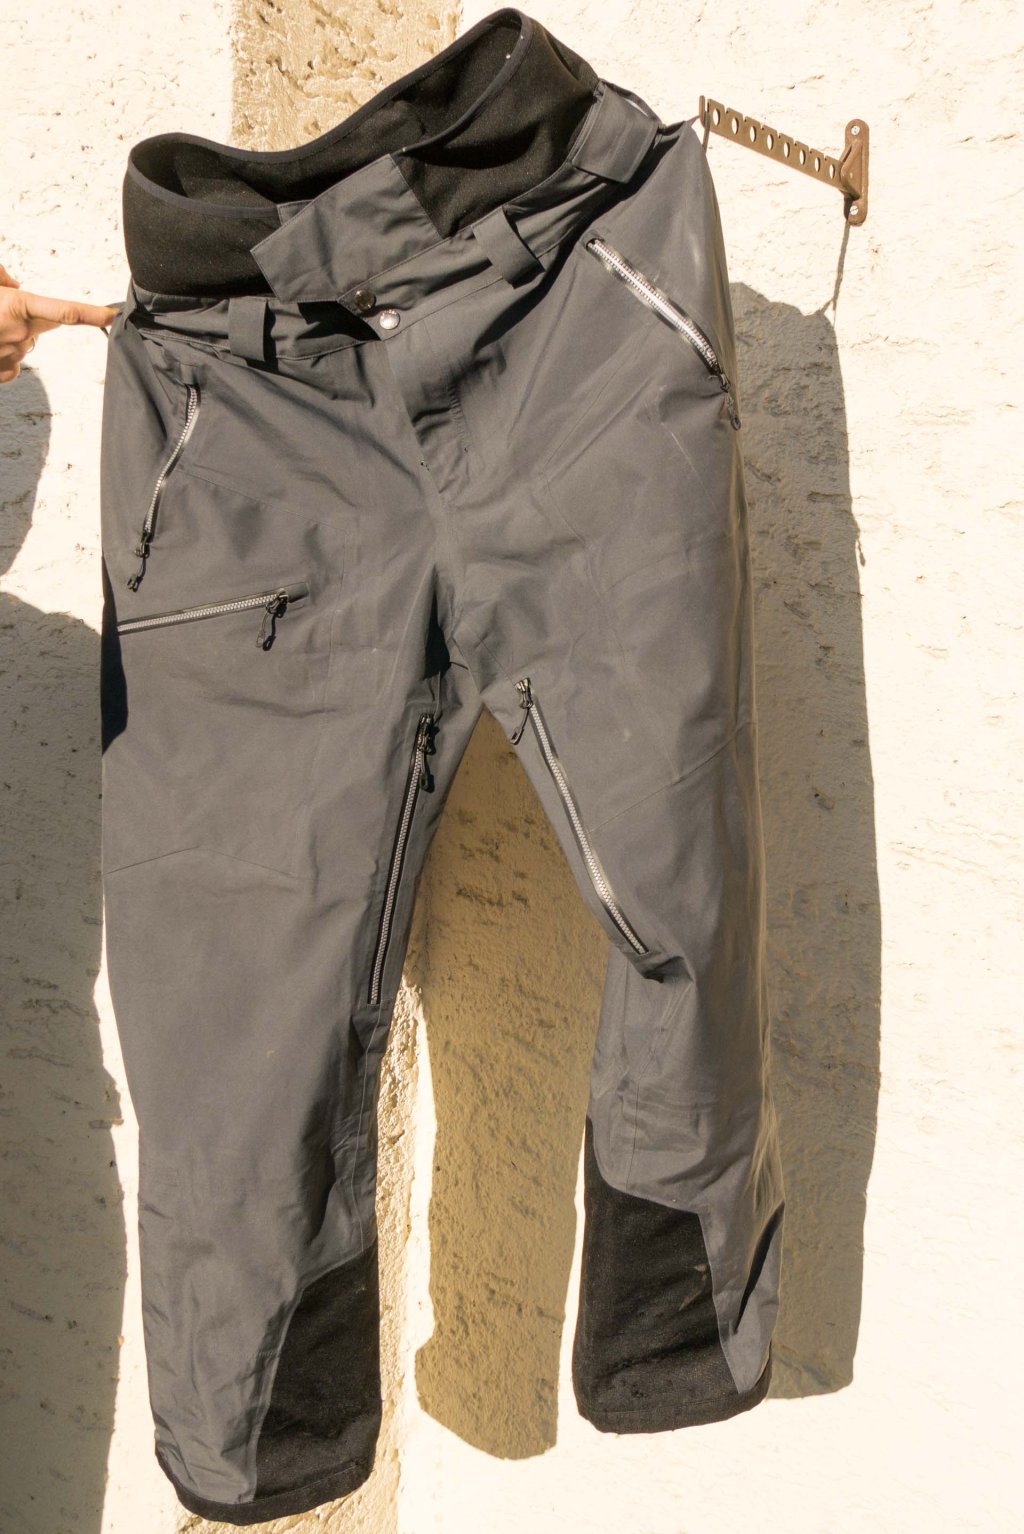 The pants have a few loops on the waistband, which is practical for hanging them up to dry